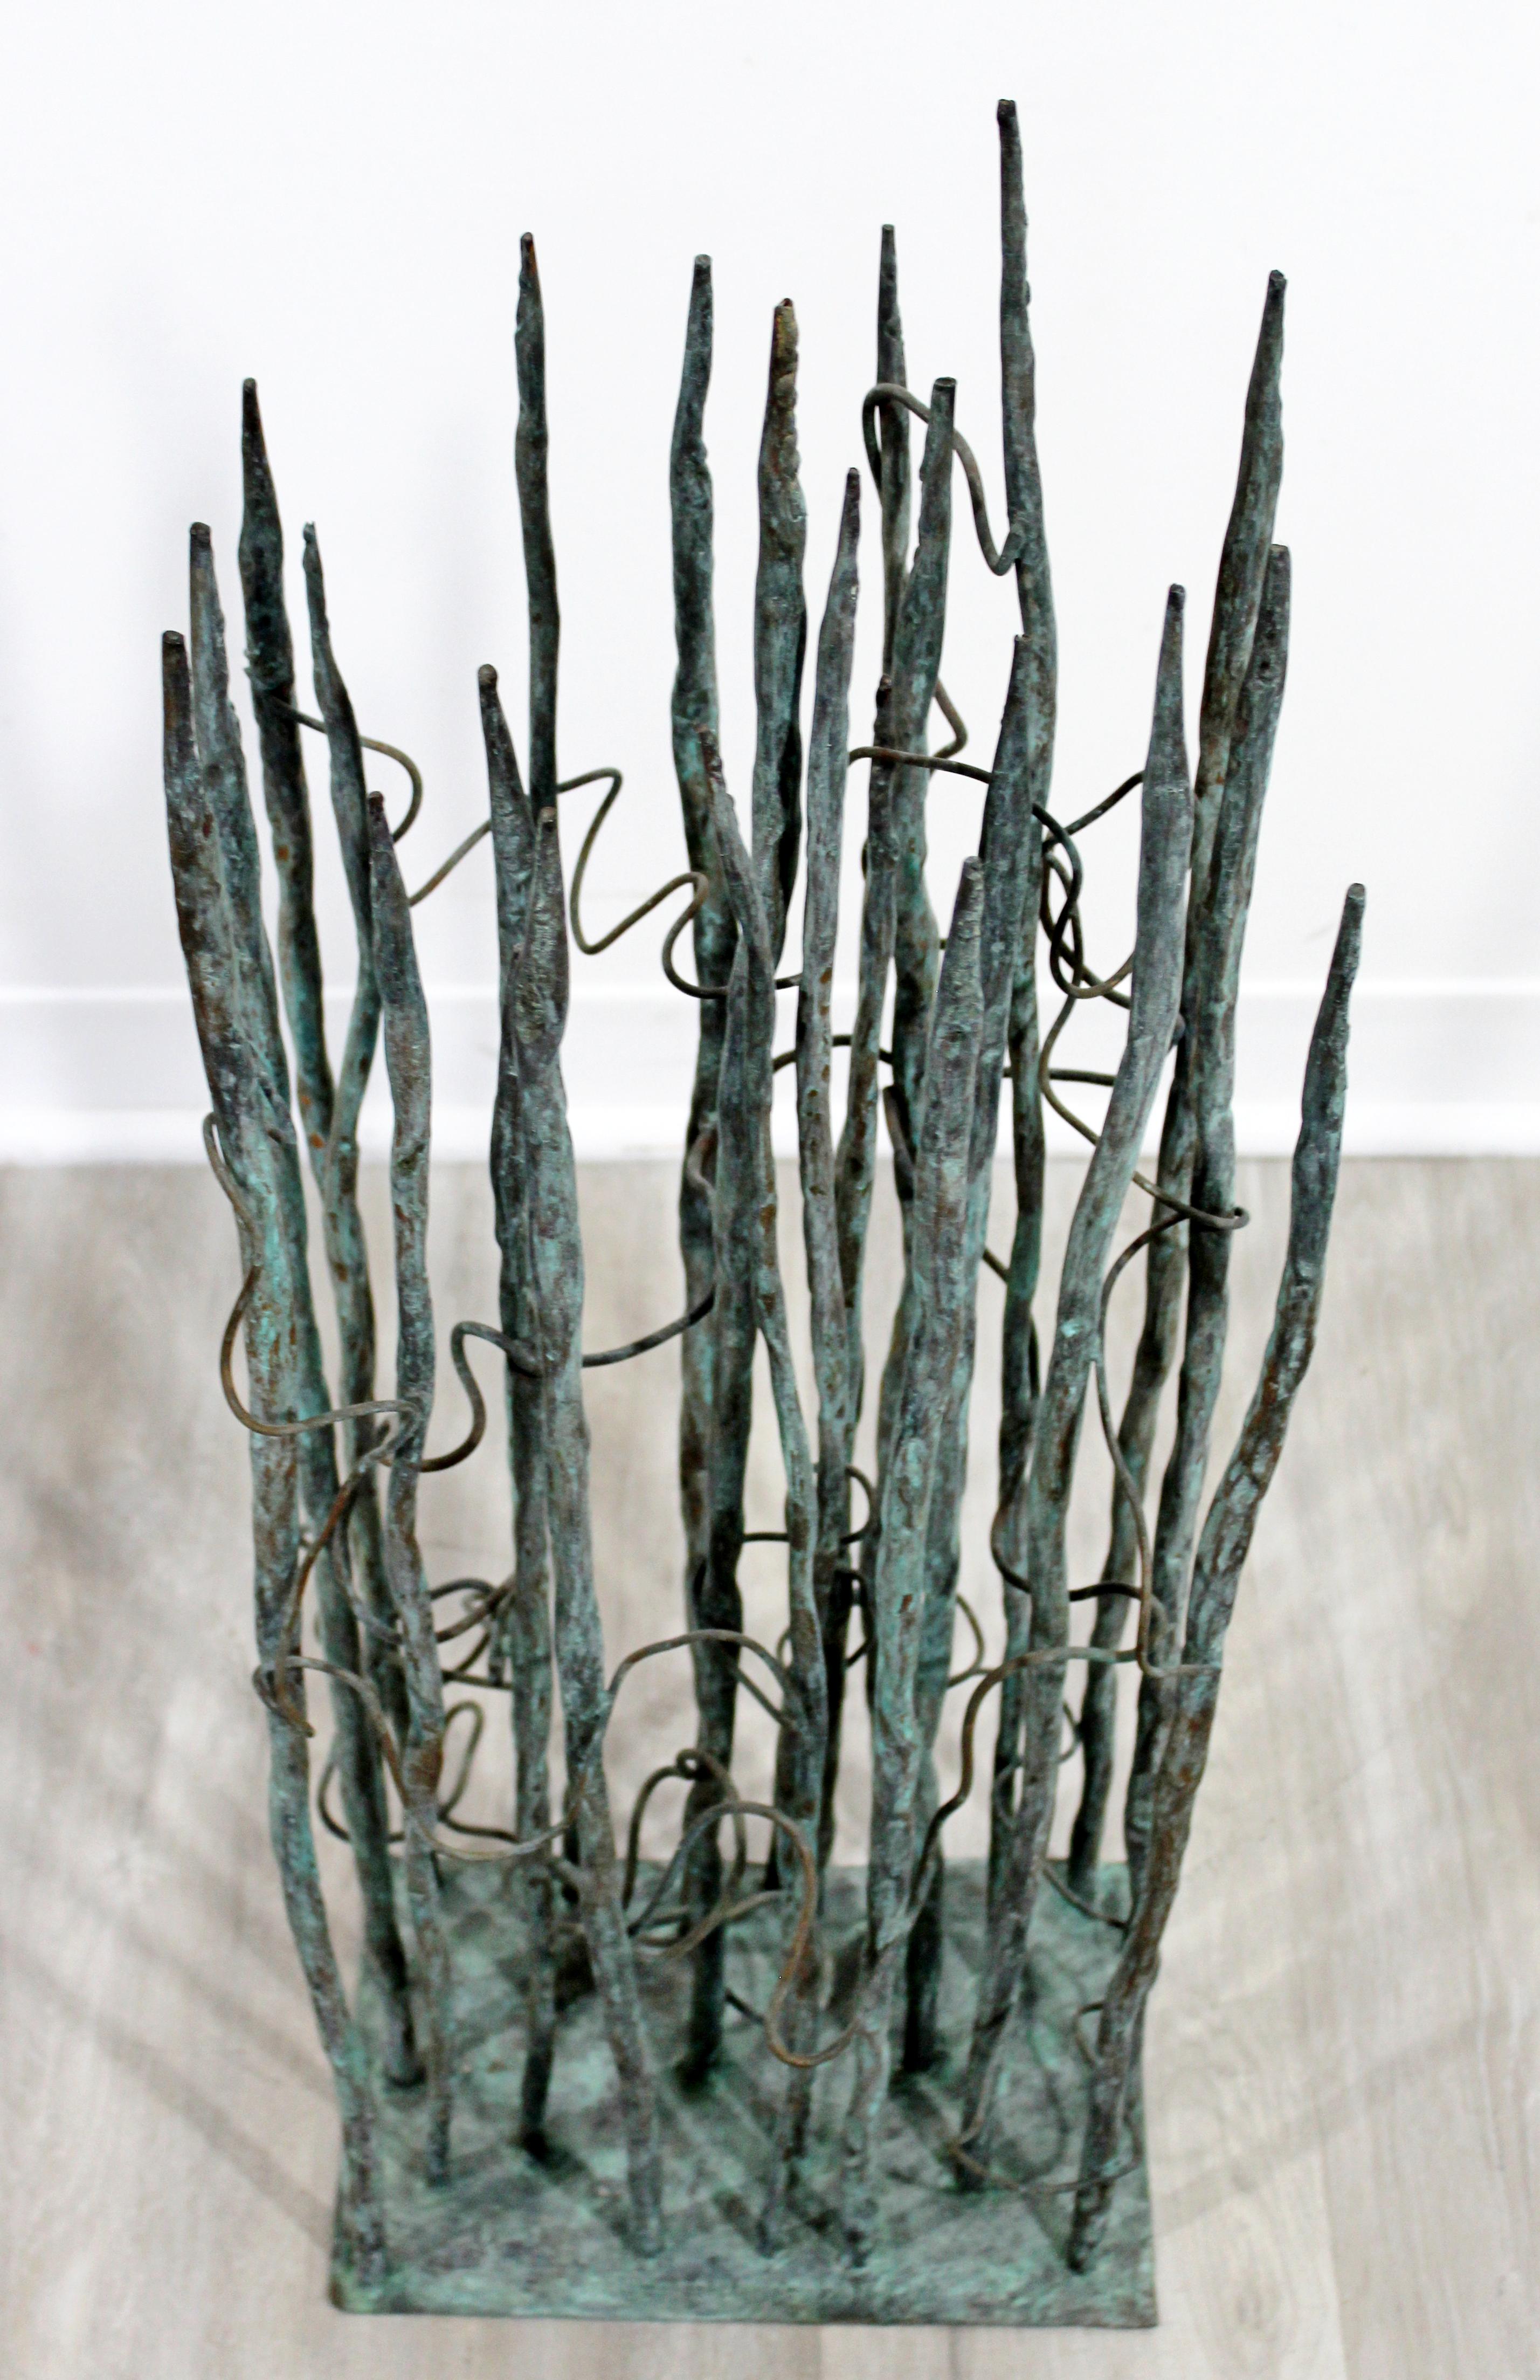 American Contemporary Forged Painted Copper Bertoia Style Reed Sculpture Signed Hansen